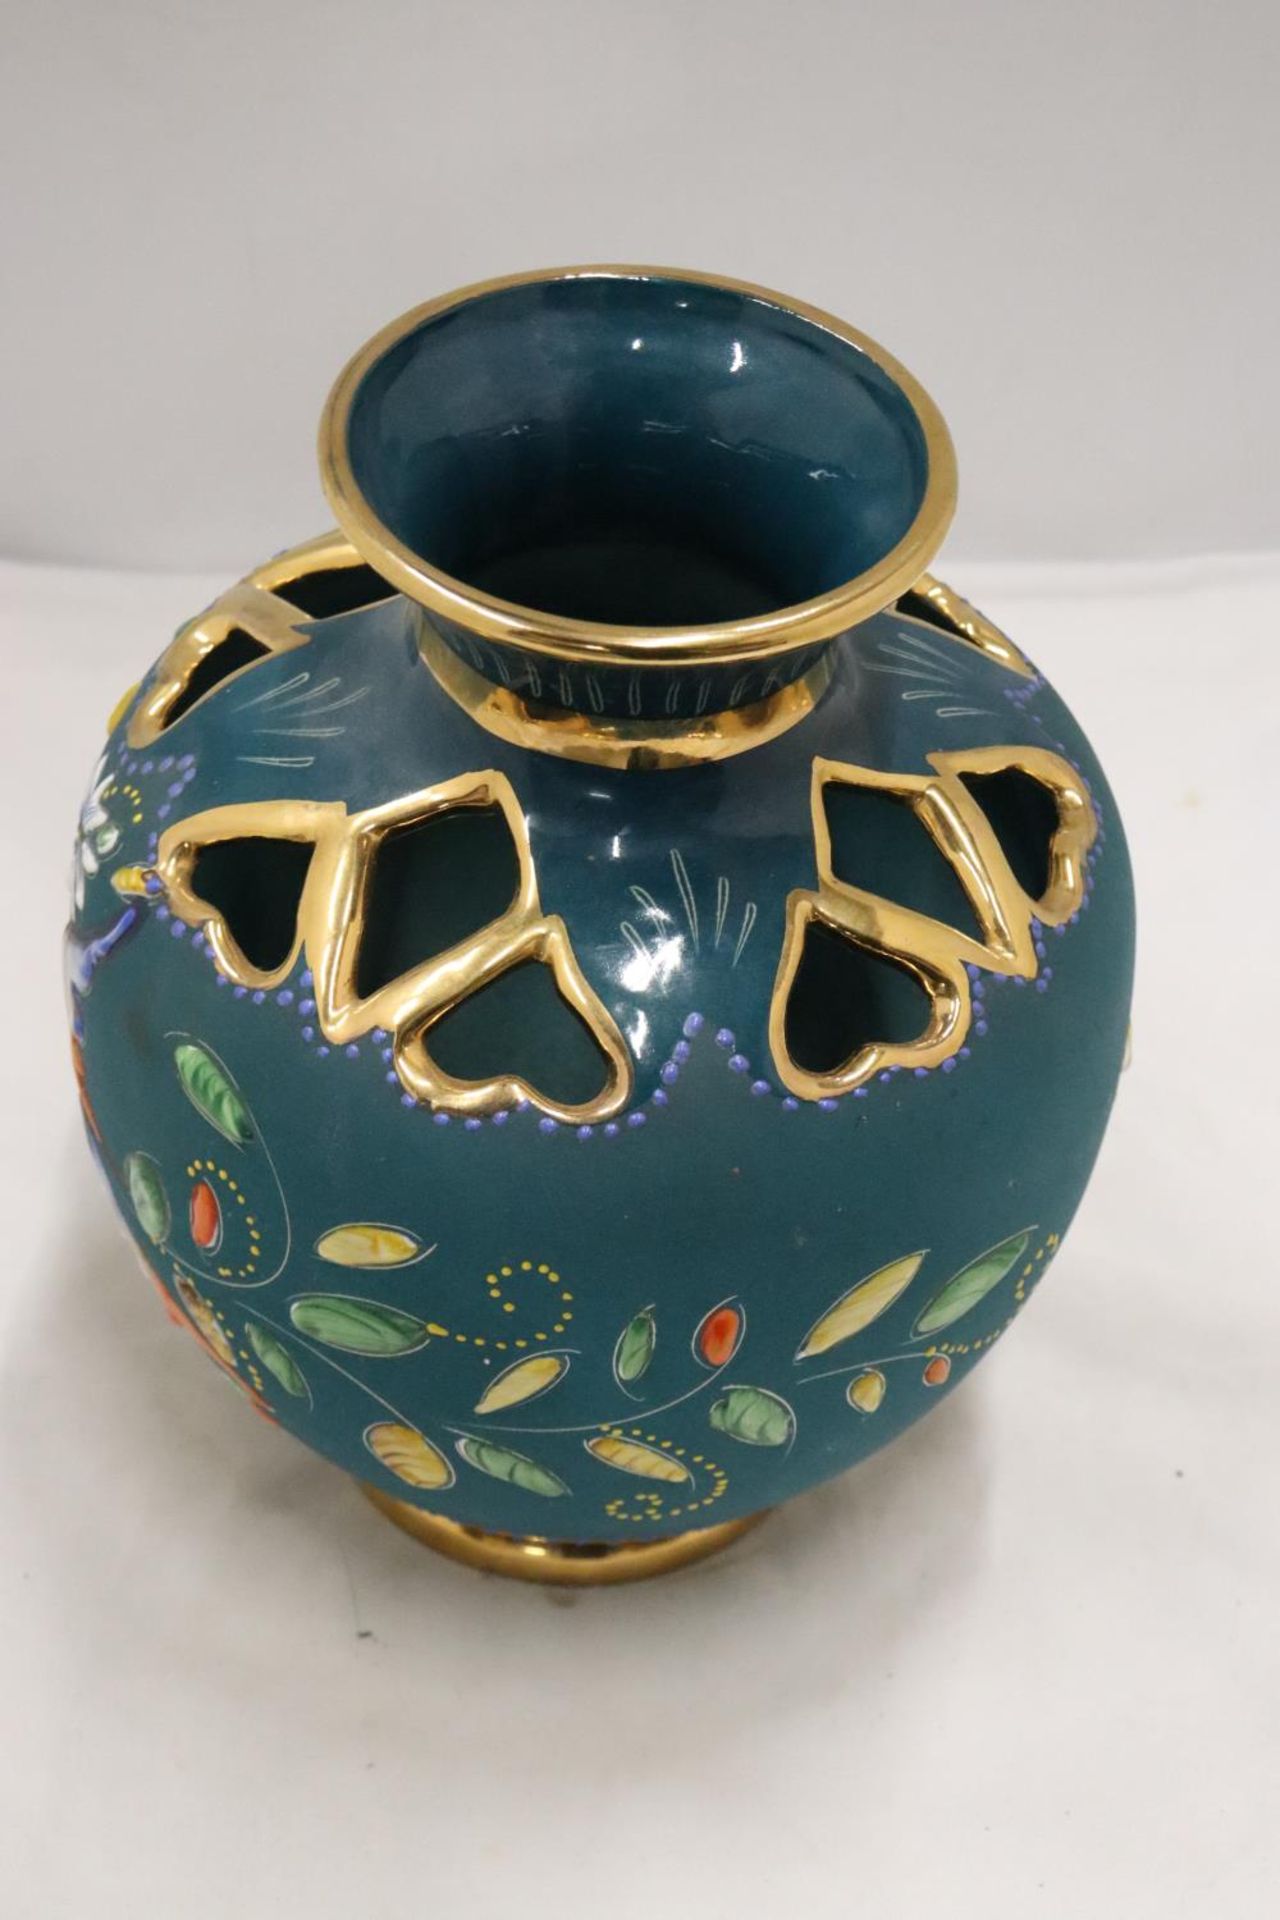 A CONTINENTAL TEAL BLUE VASE WITH THE MARK HB, QUAREGNON, BELGIUM TO THE BASE